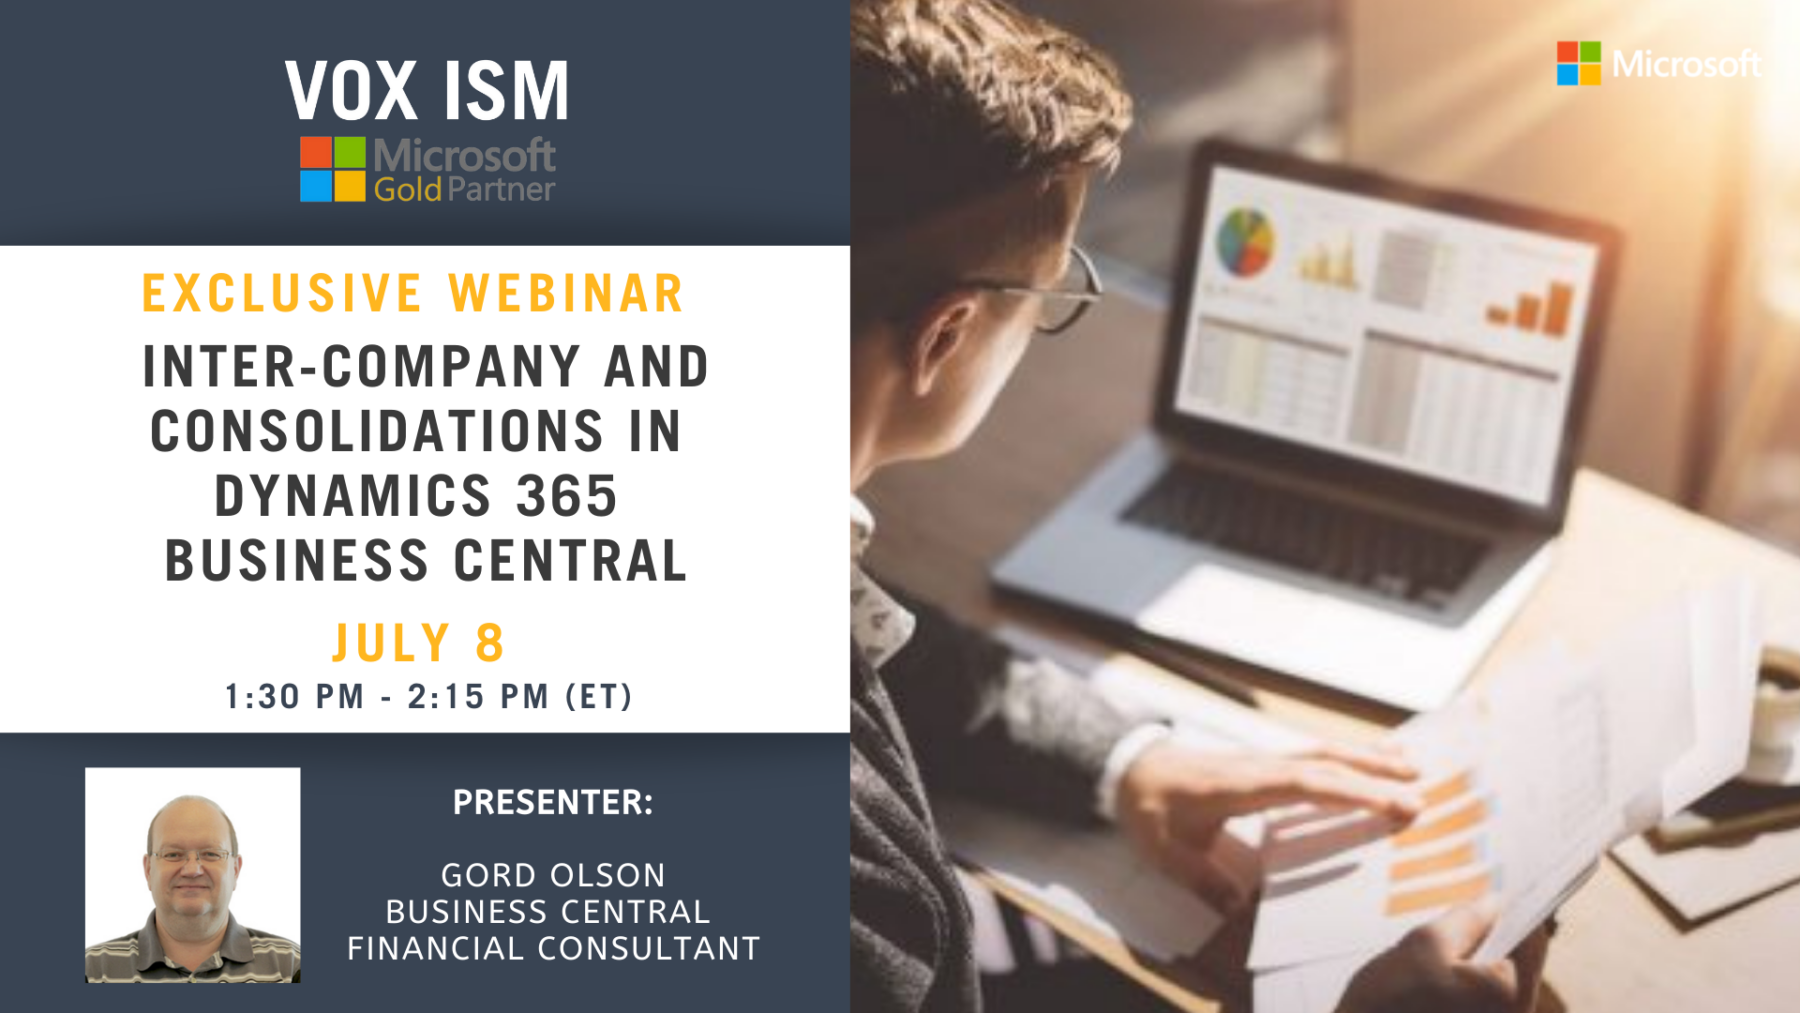 Inter-Company and Consolidations in Dynamics 365 Business Central - July 8 - Webinar